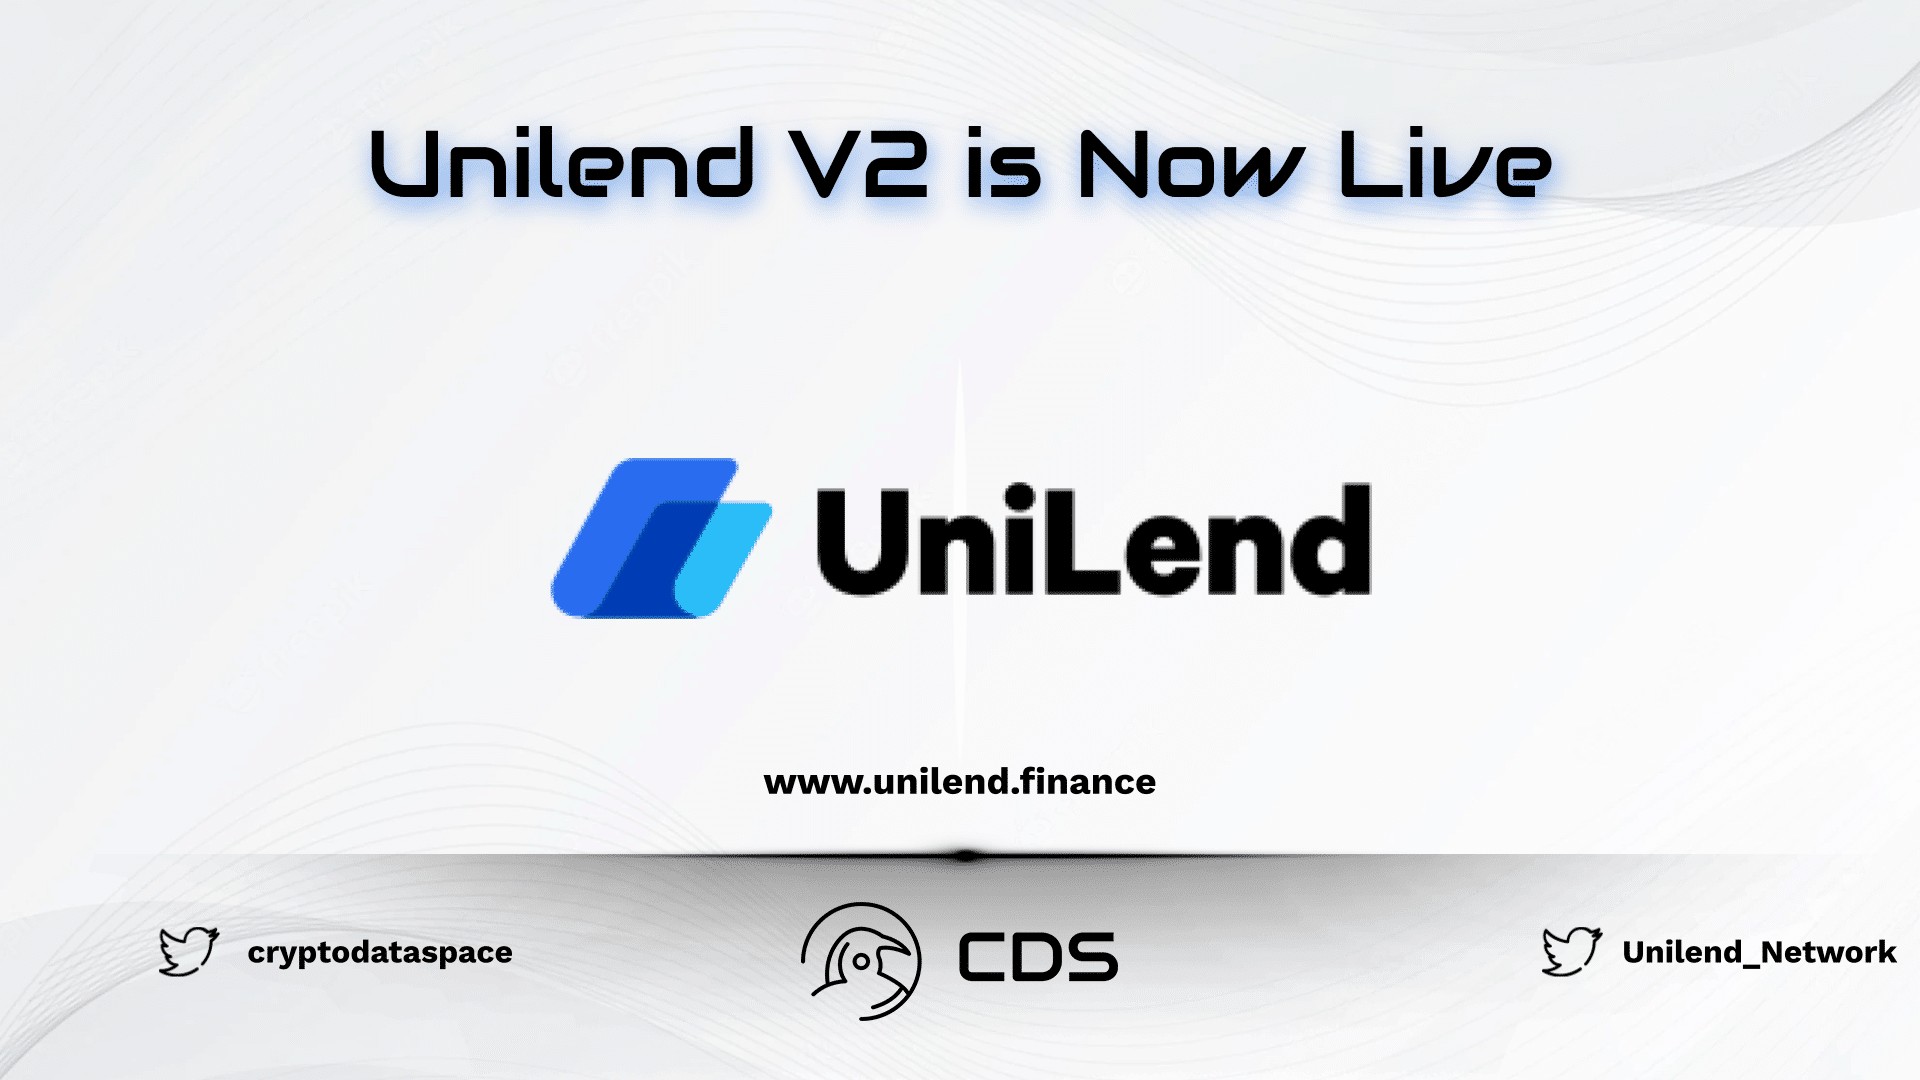 Unilend V2 is Now Live